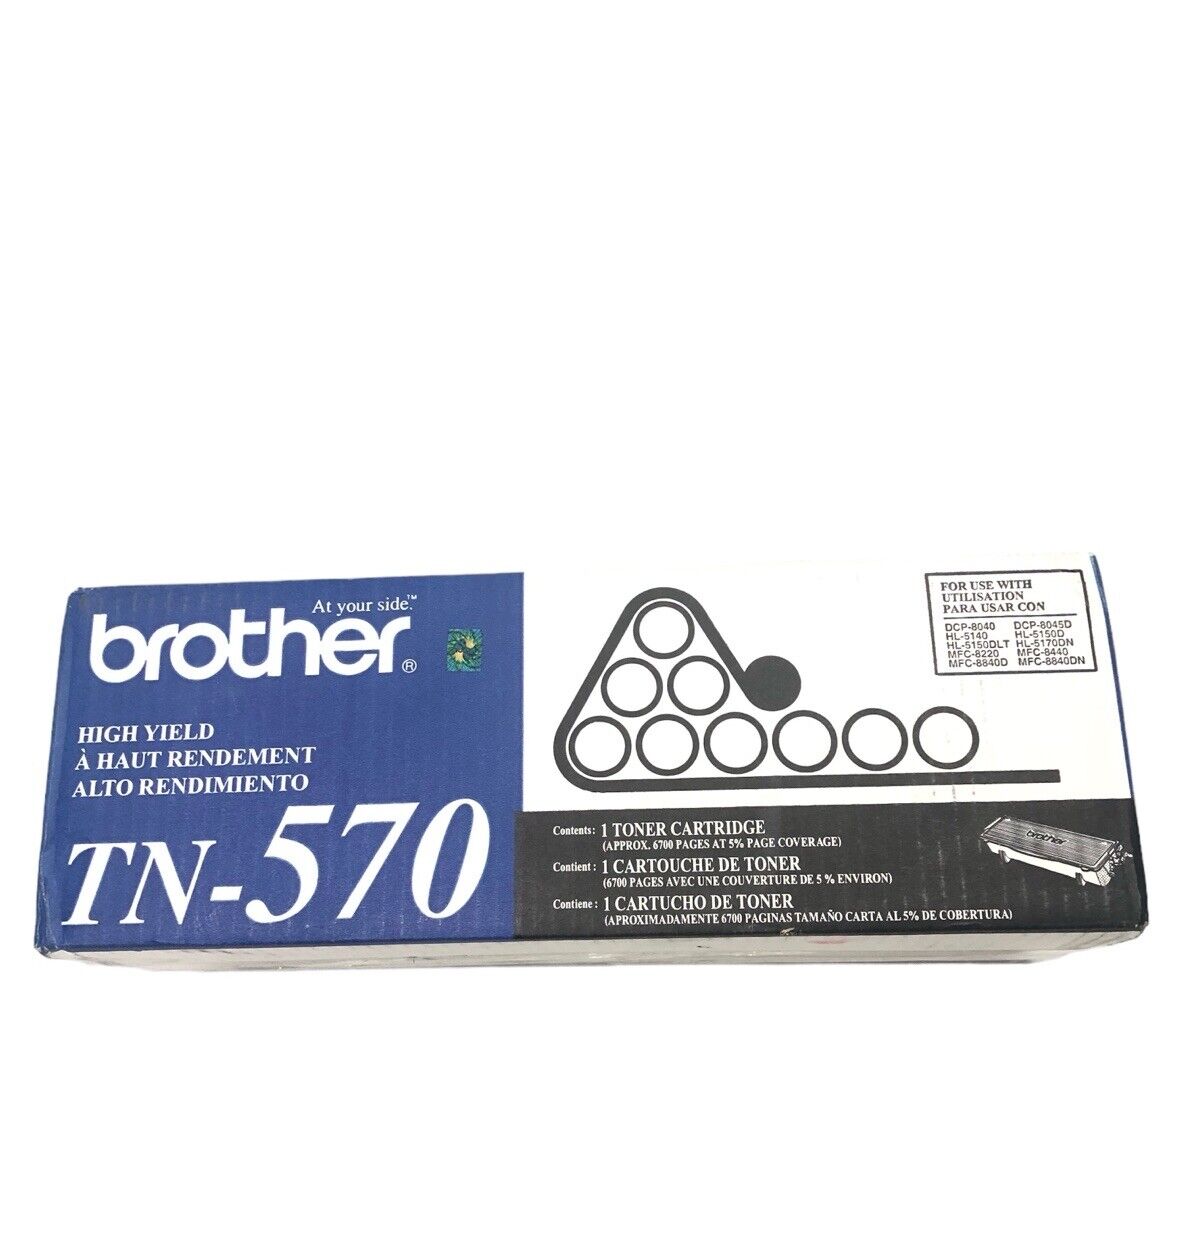 GENUINE BROTHER TN-570 Toner Cartridge Black For DCP-8040 DCP-8045D NEW SEALED